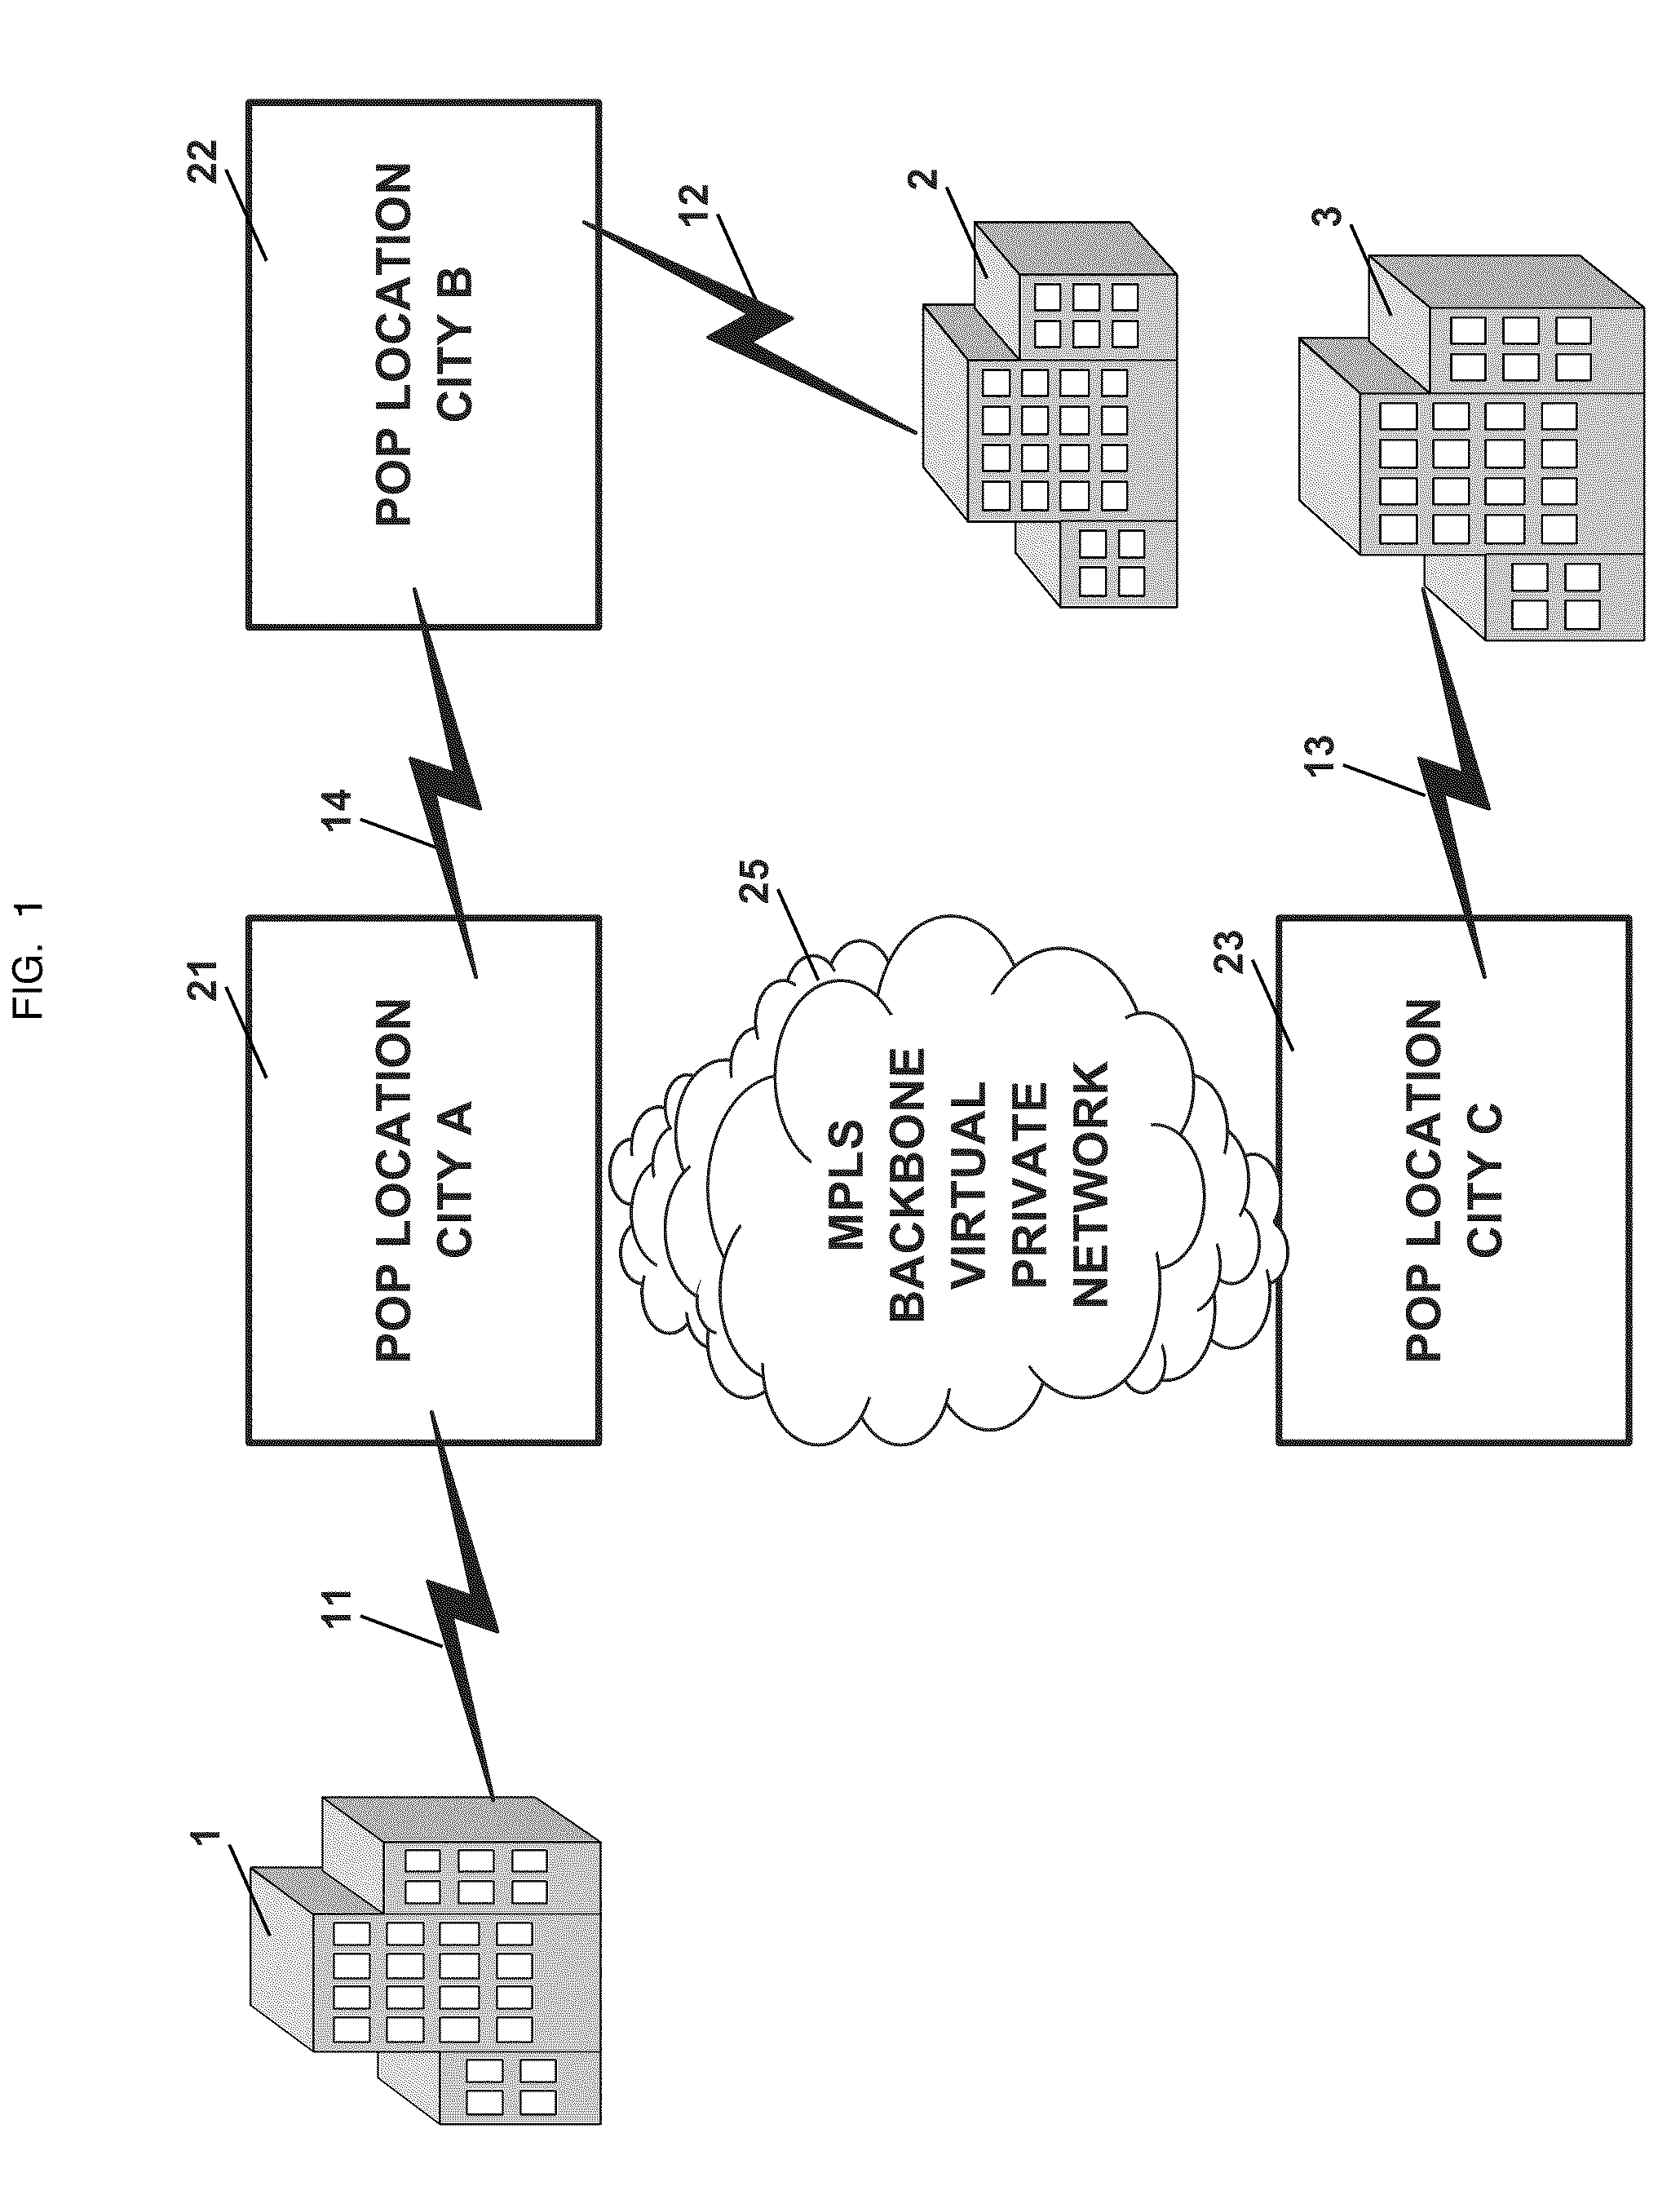 System and method for transmitting video, audio, and data content using a fiber optic network